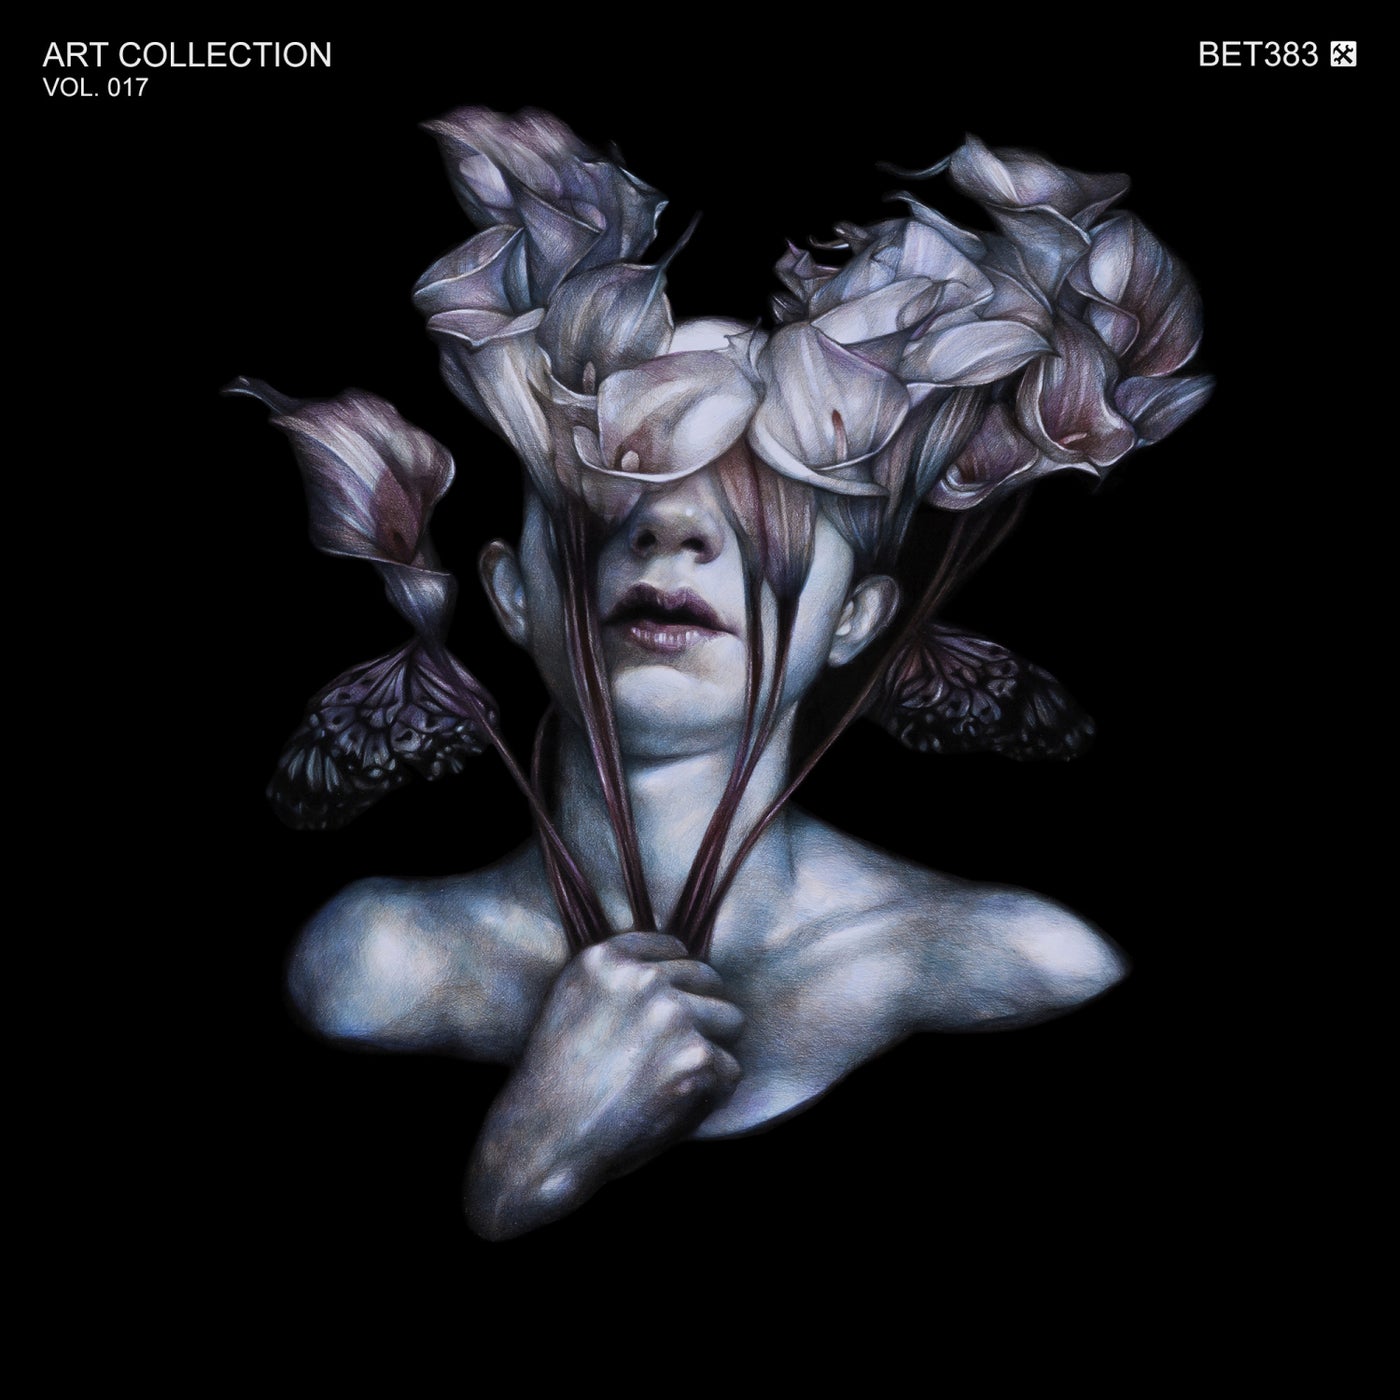 ART Collection, Vol. 017